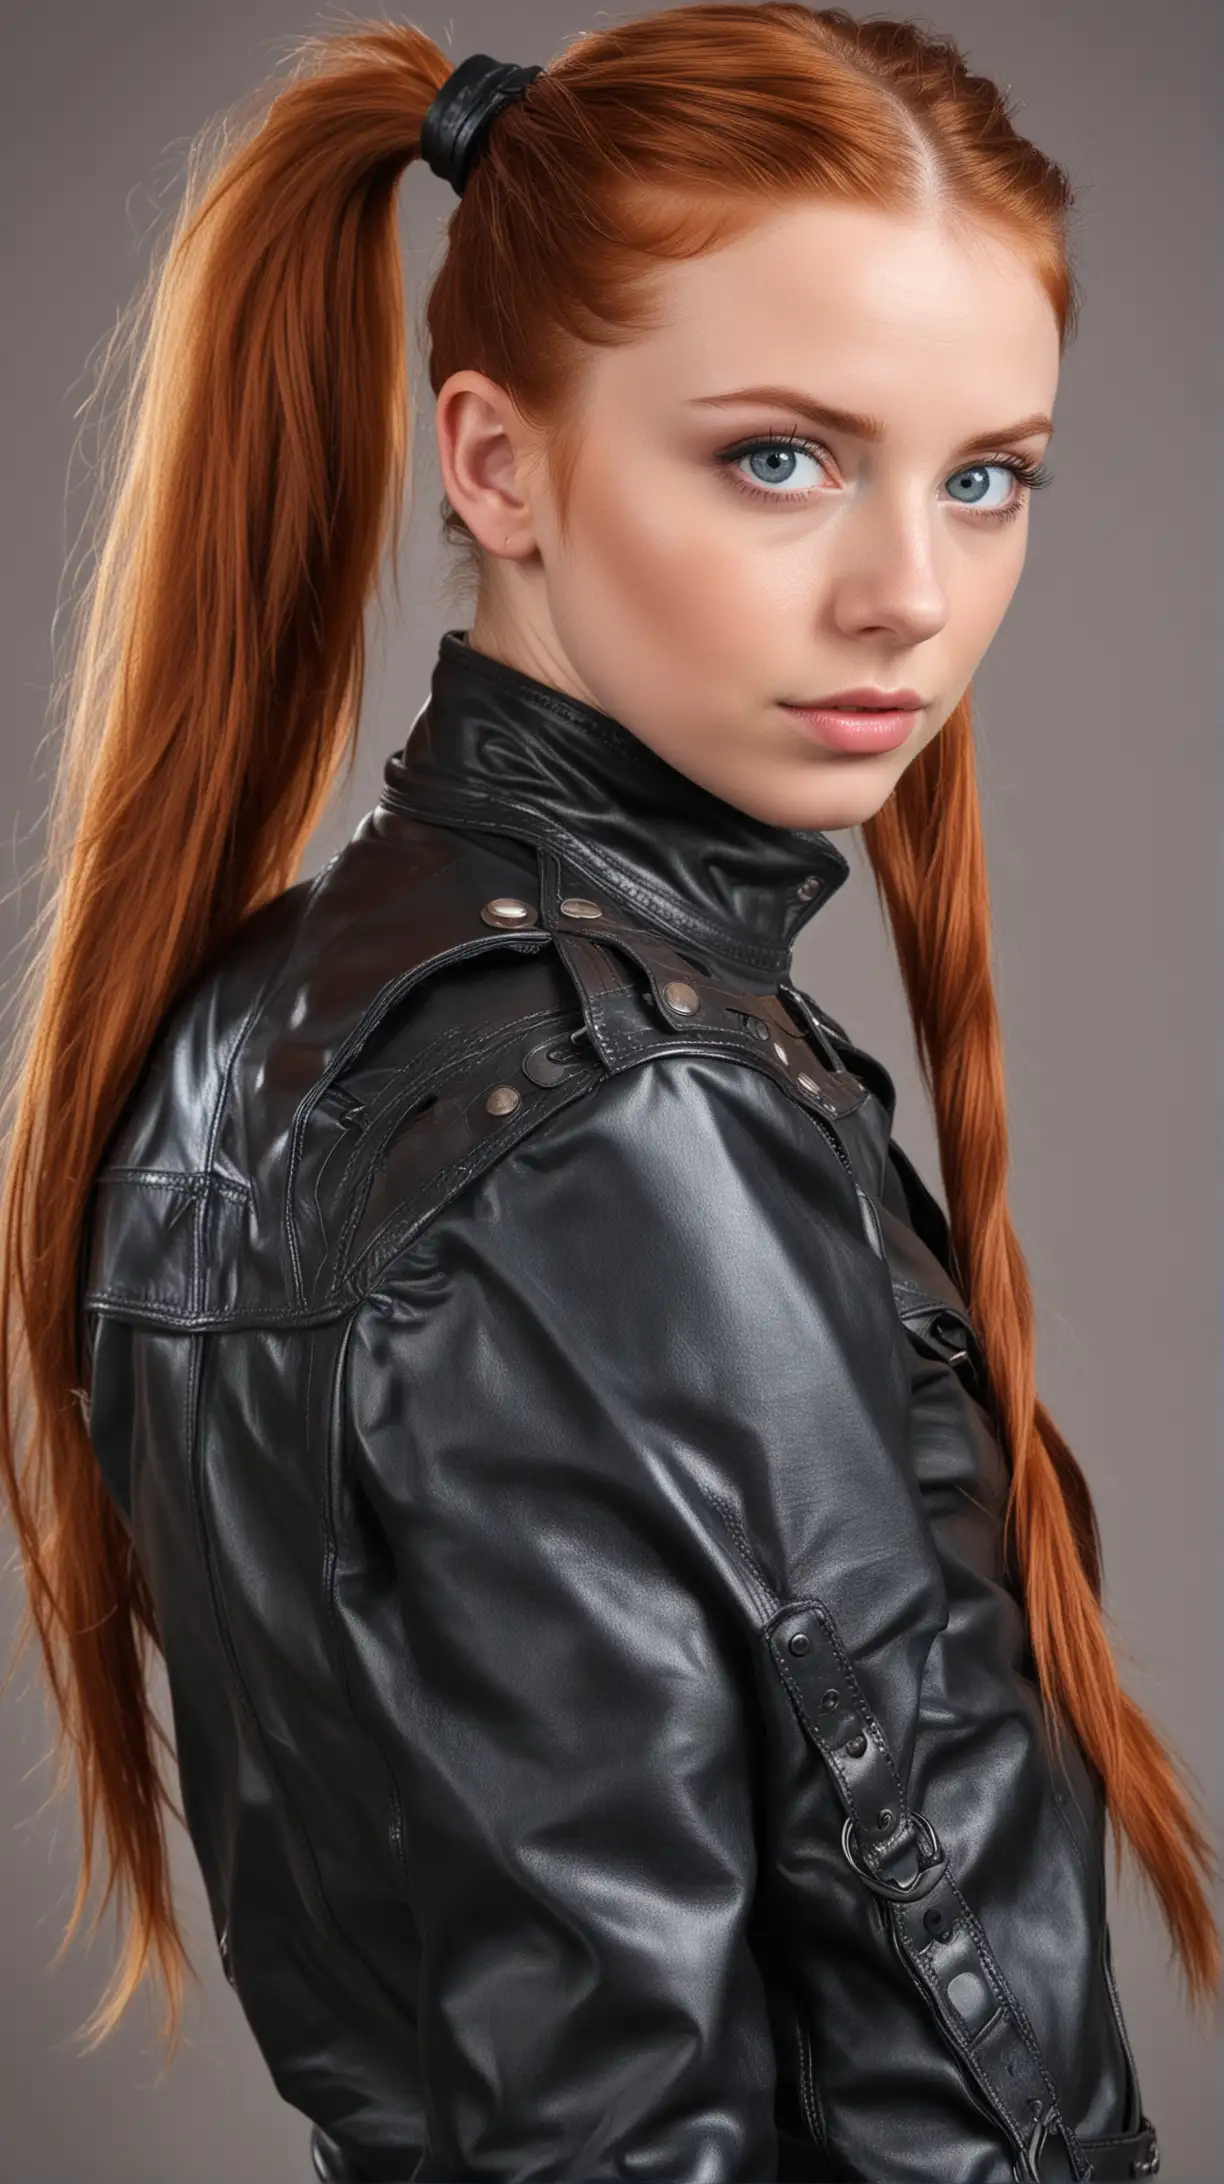 Cheerful Young Redhead Girl with Blue Eyes and Ponytails in Heavy Leather Attire